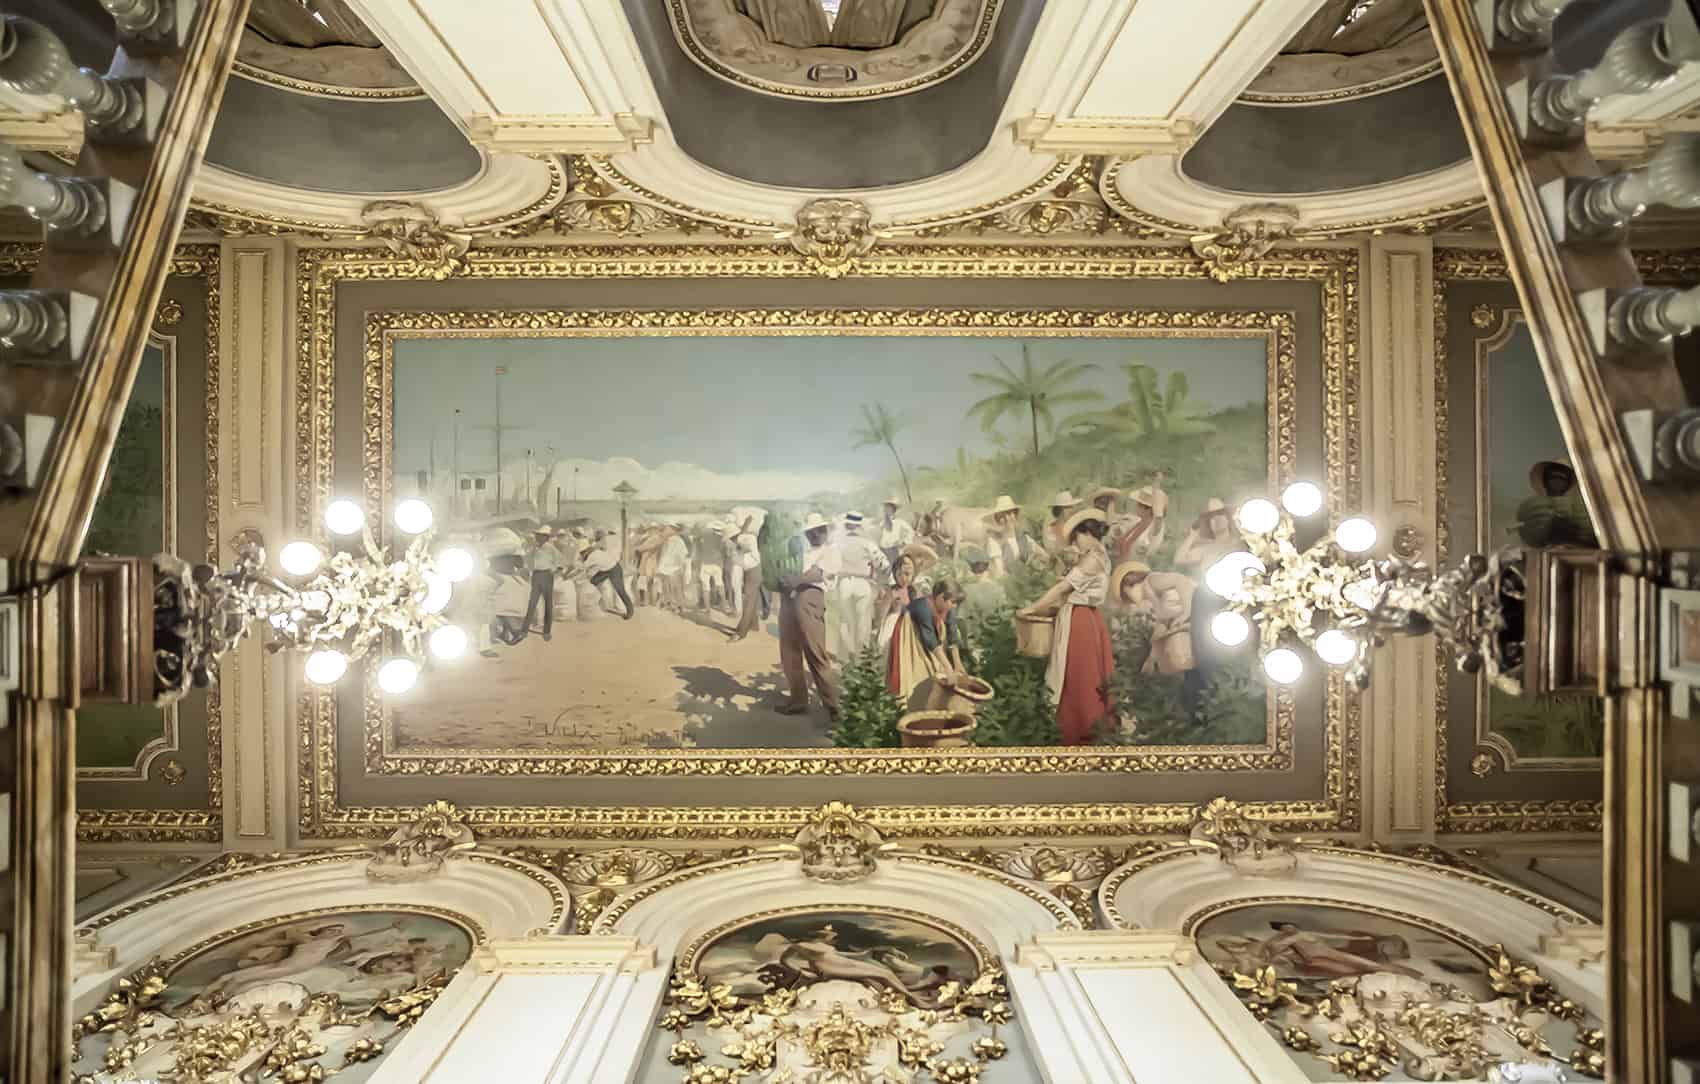 Costa Rica S National Theater Mural Named One Of 10 Great